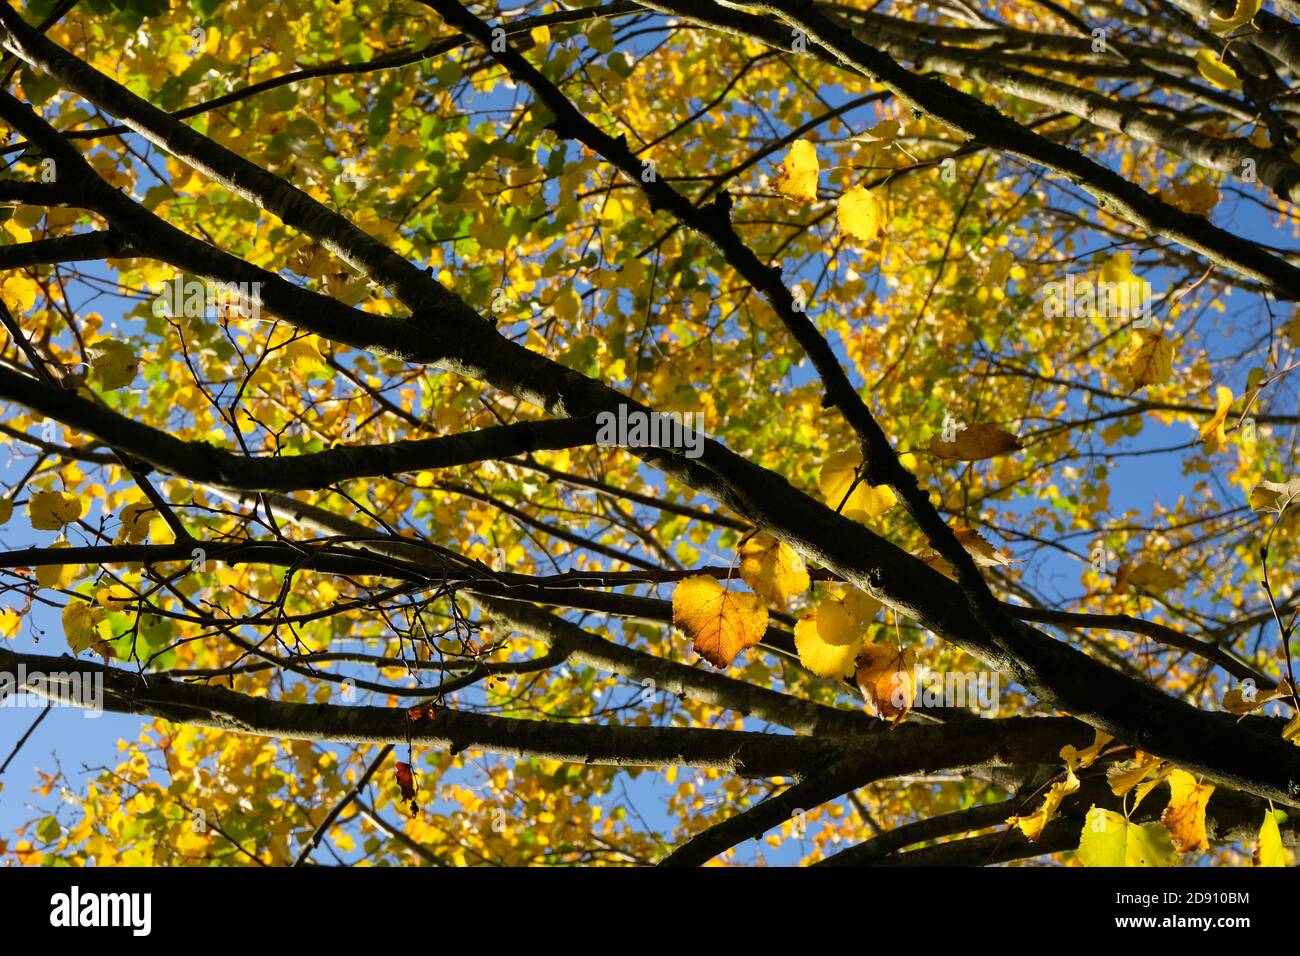 Close up photo of these bright yellow leaves. Stock Photo